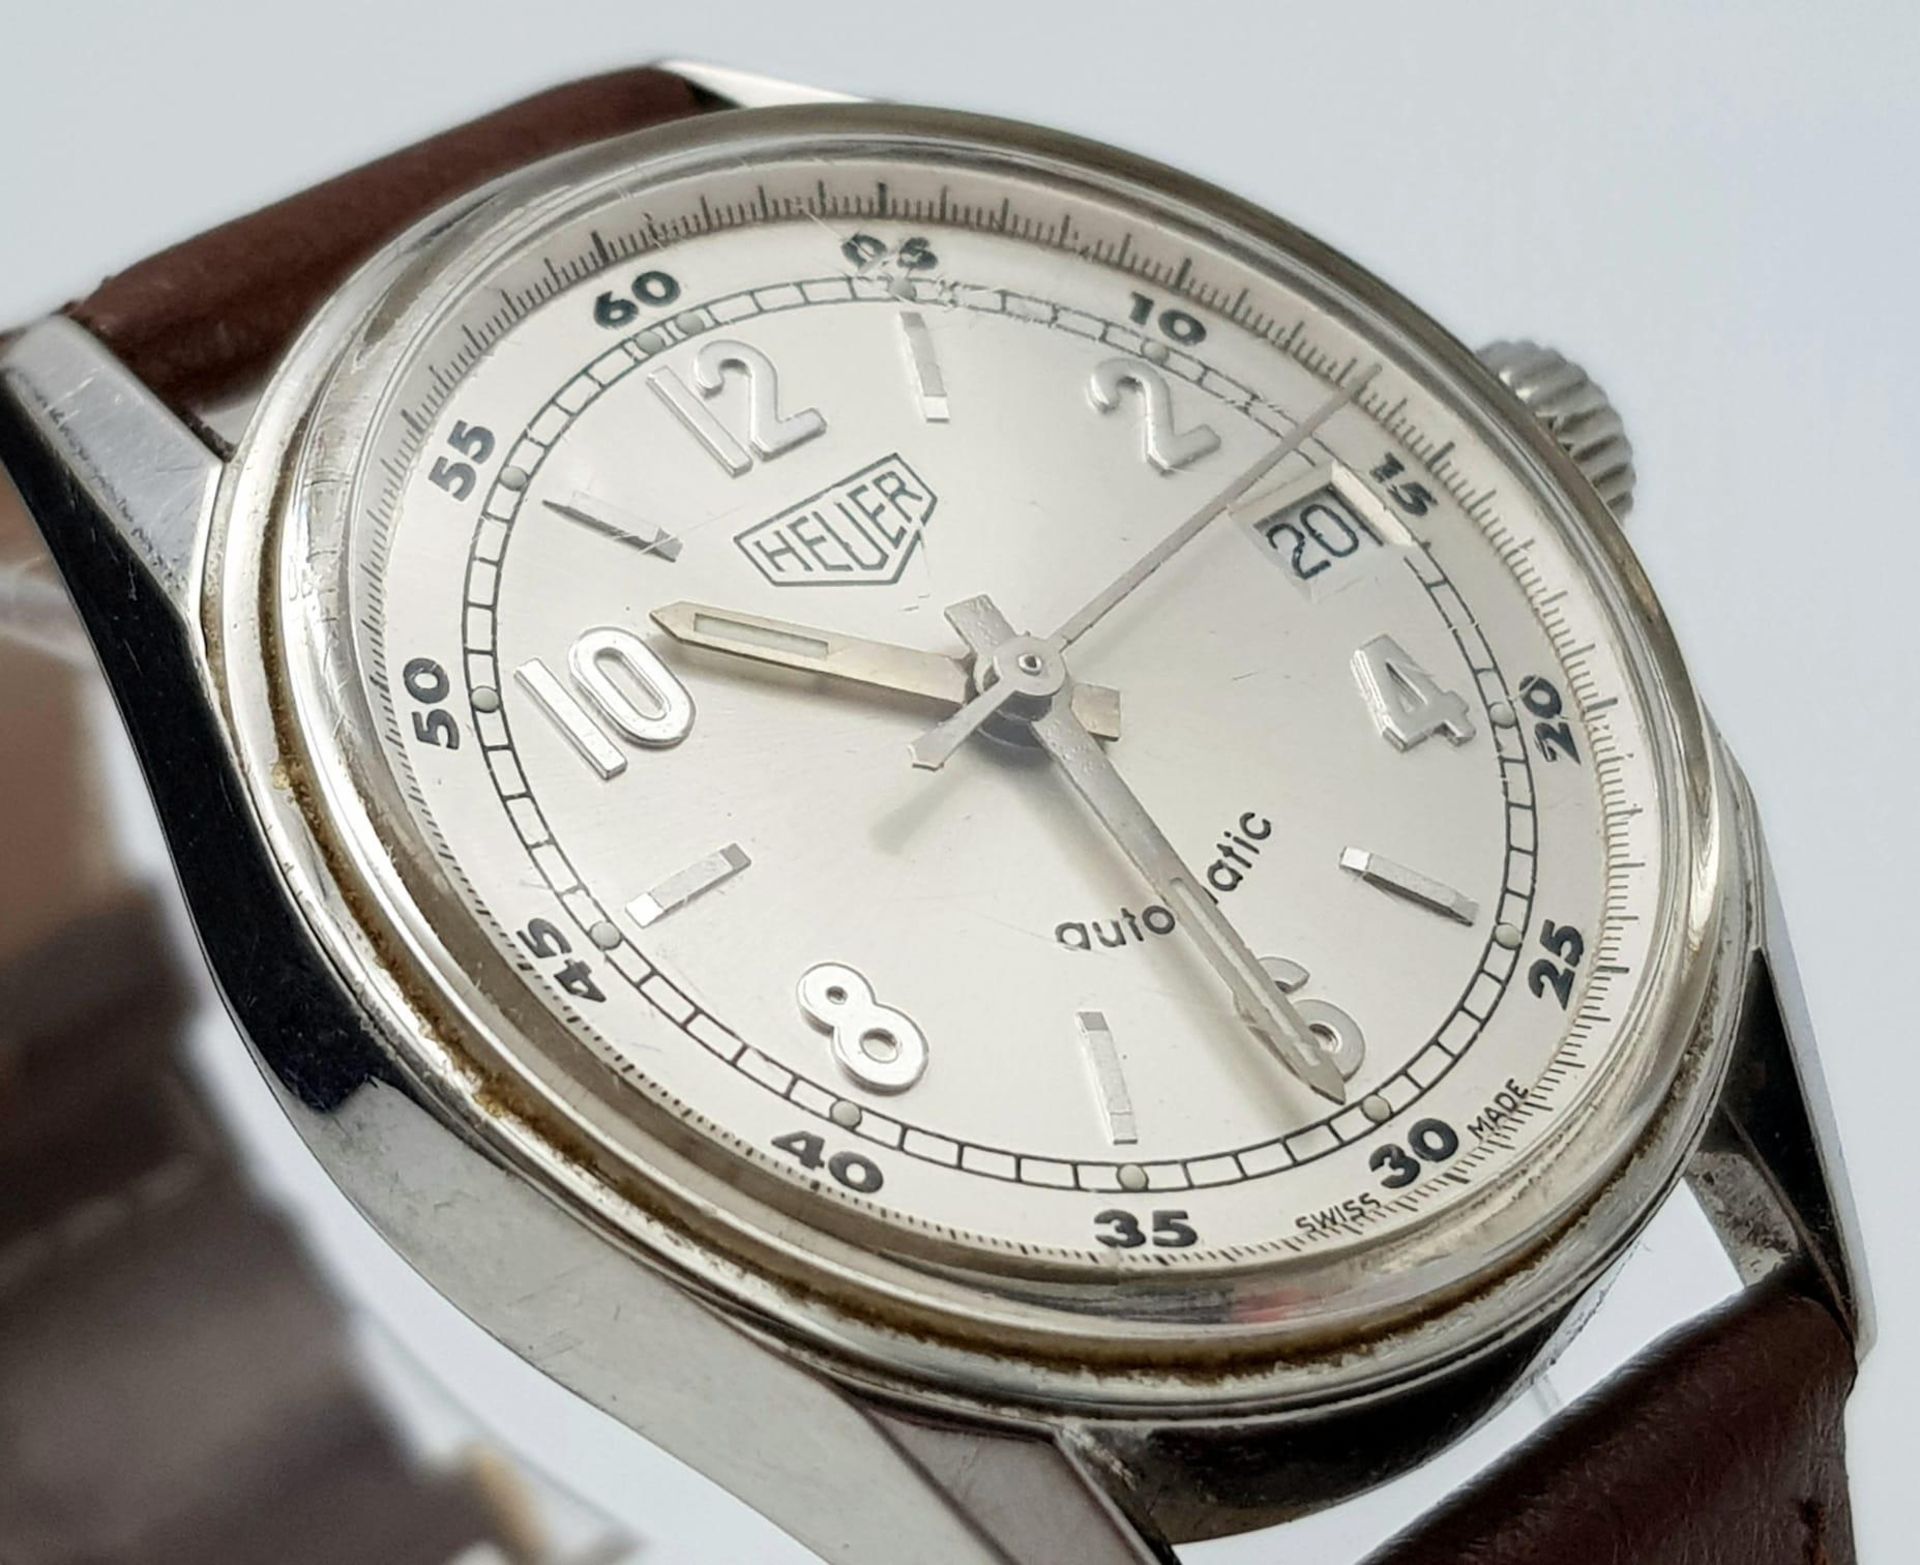 A Tag Heuer Automatic Gents Watch. Brown leather strap. Stainless steel case - 36mm. Silver tone - Image 3 of 7